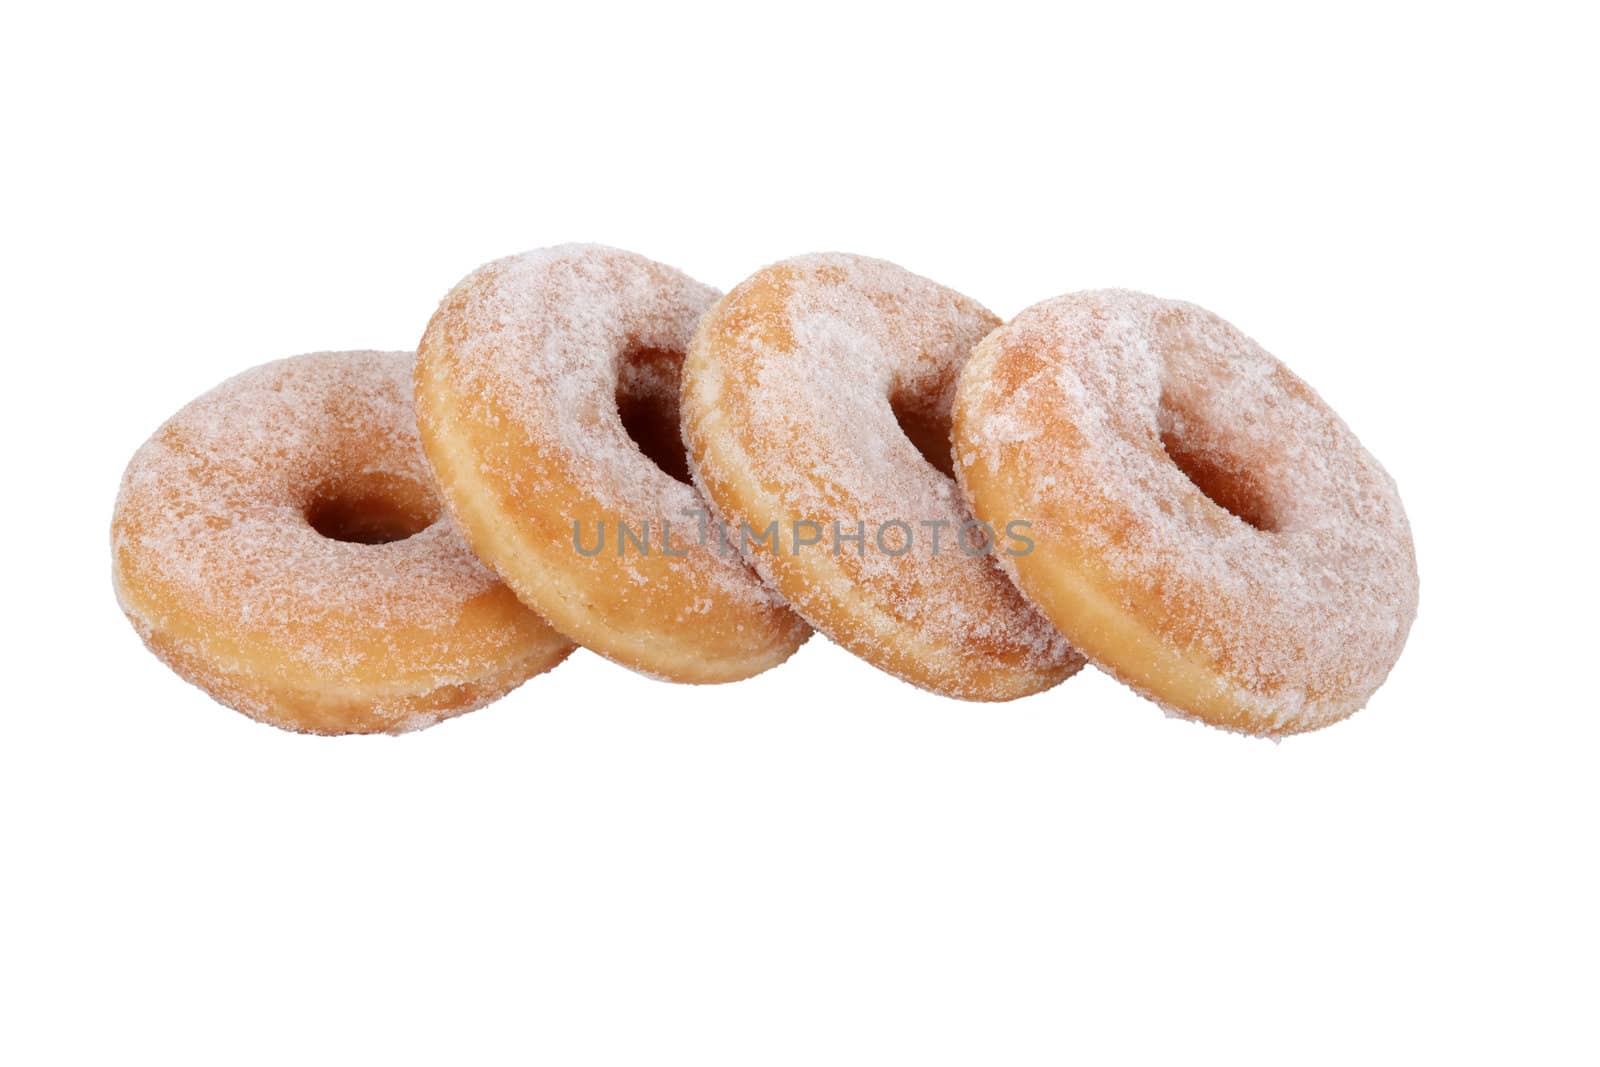 Donuts on white background by phovoir